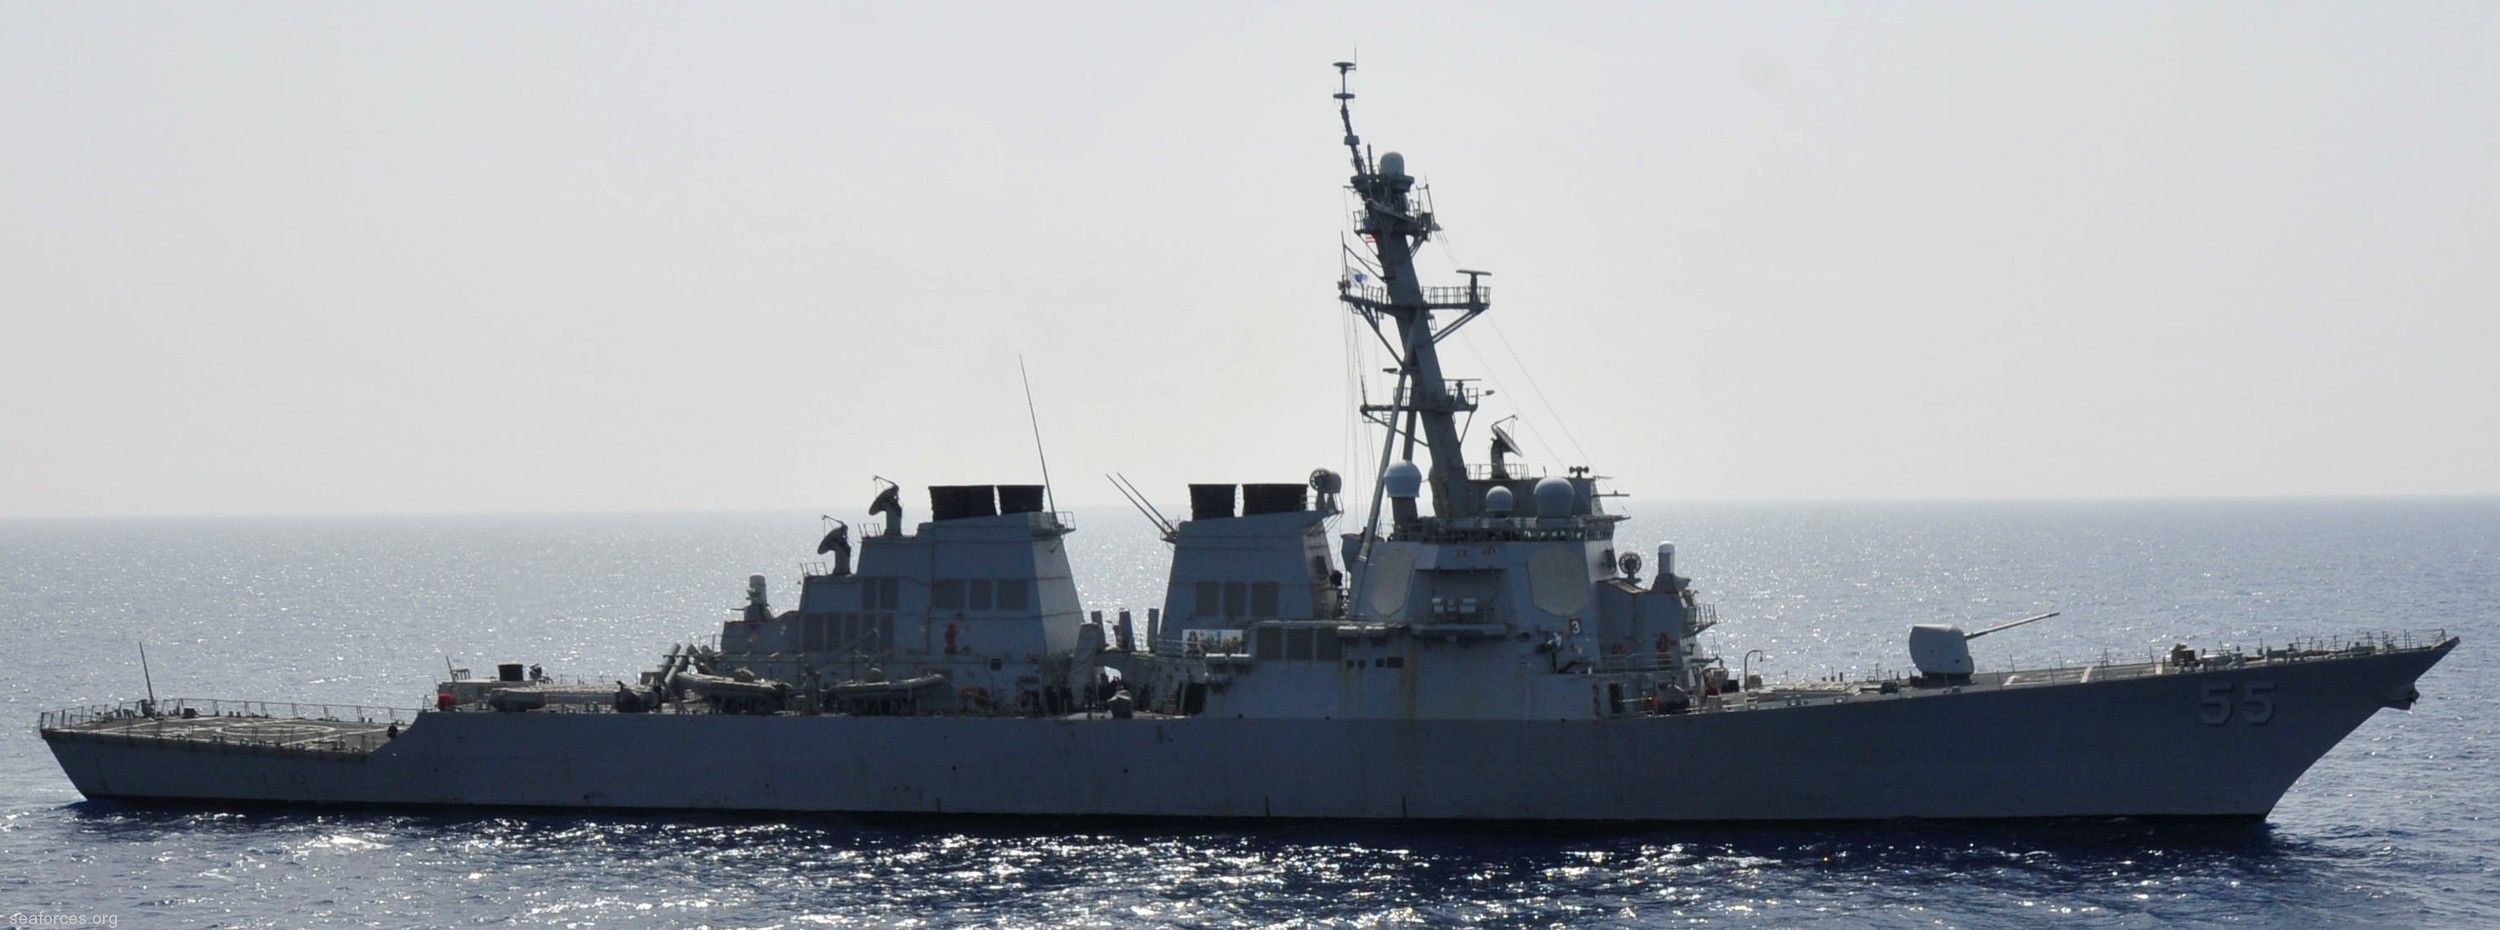 ddg-55 uss stout guided missile destroyer us navy 78